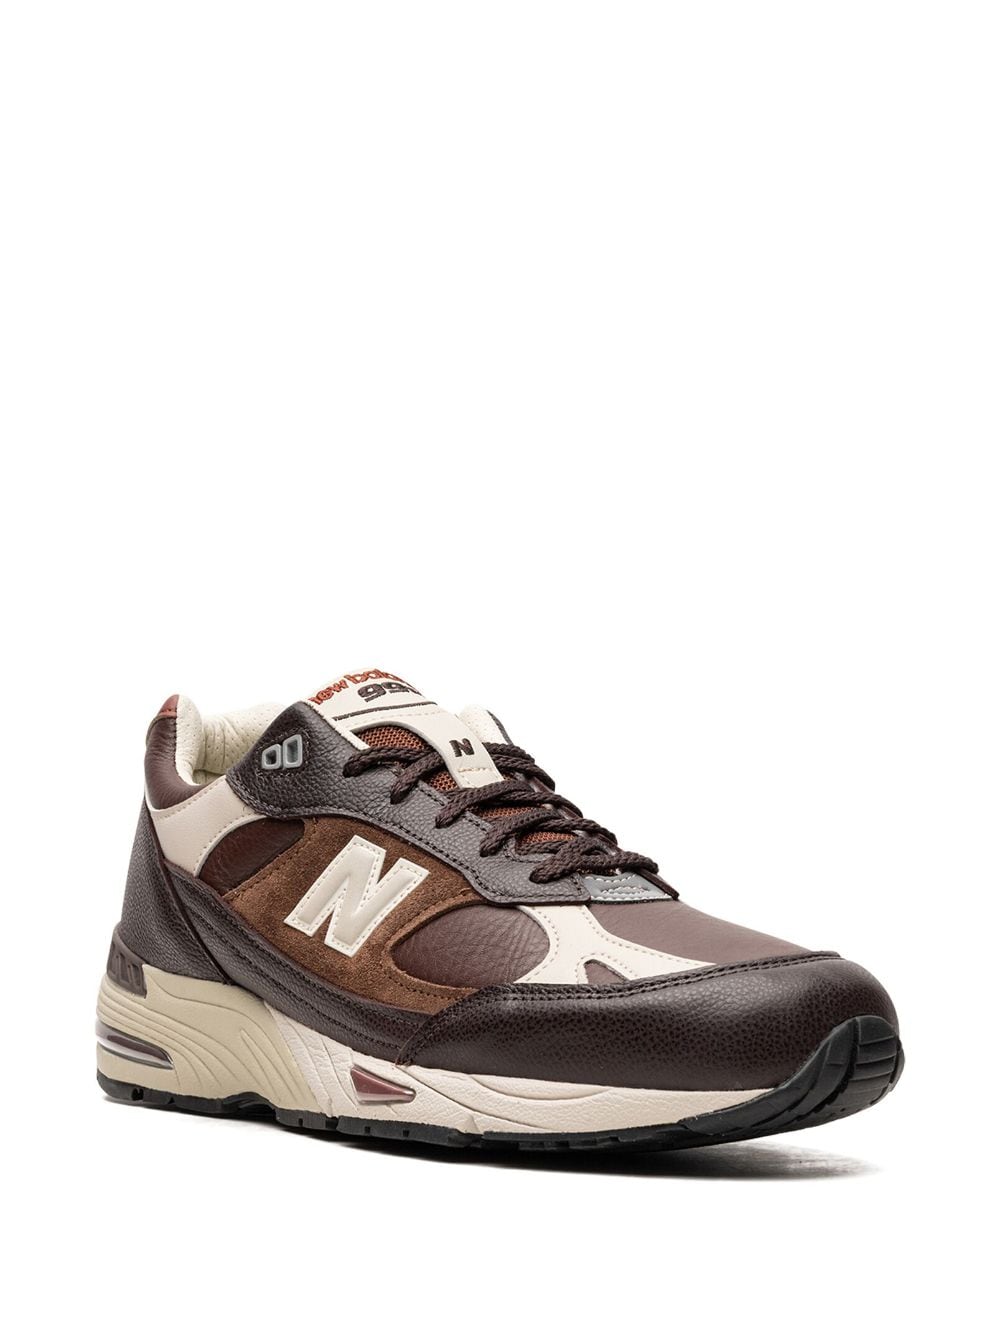 New Balance 991 "Made in England" sneakers - Bruin